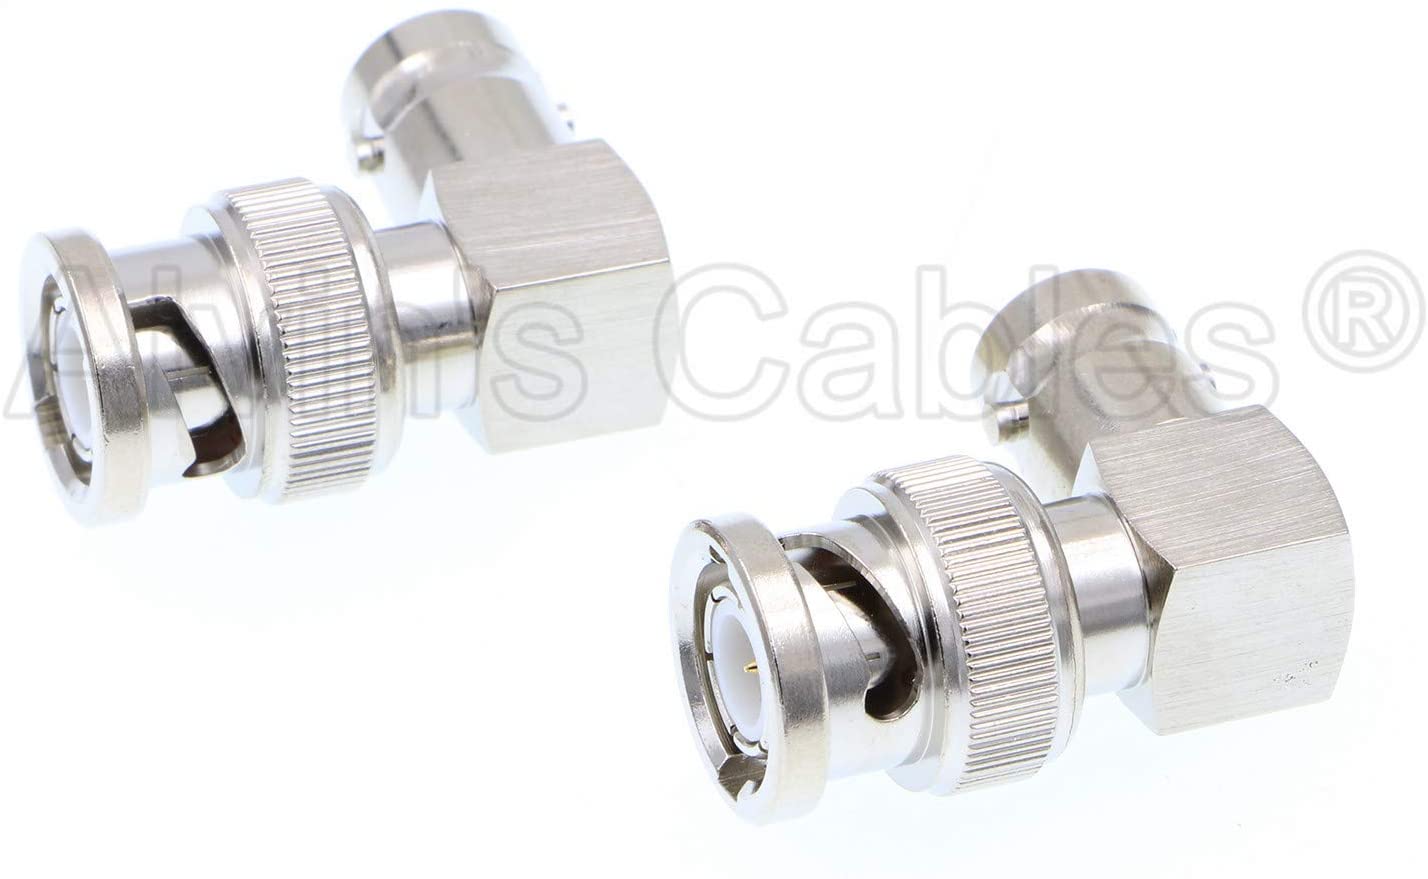 Alvin's Cables Right Angle Convert Connectors for 12G HD SDI BNC Cable One Set